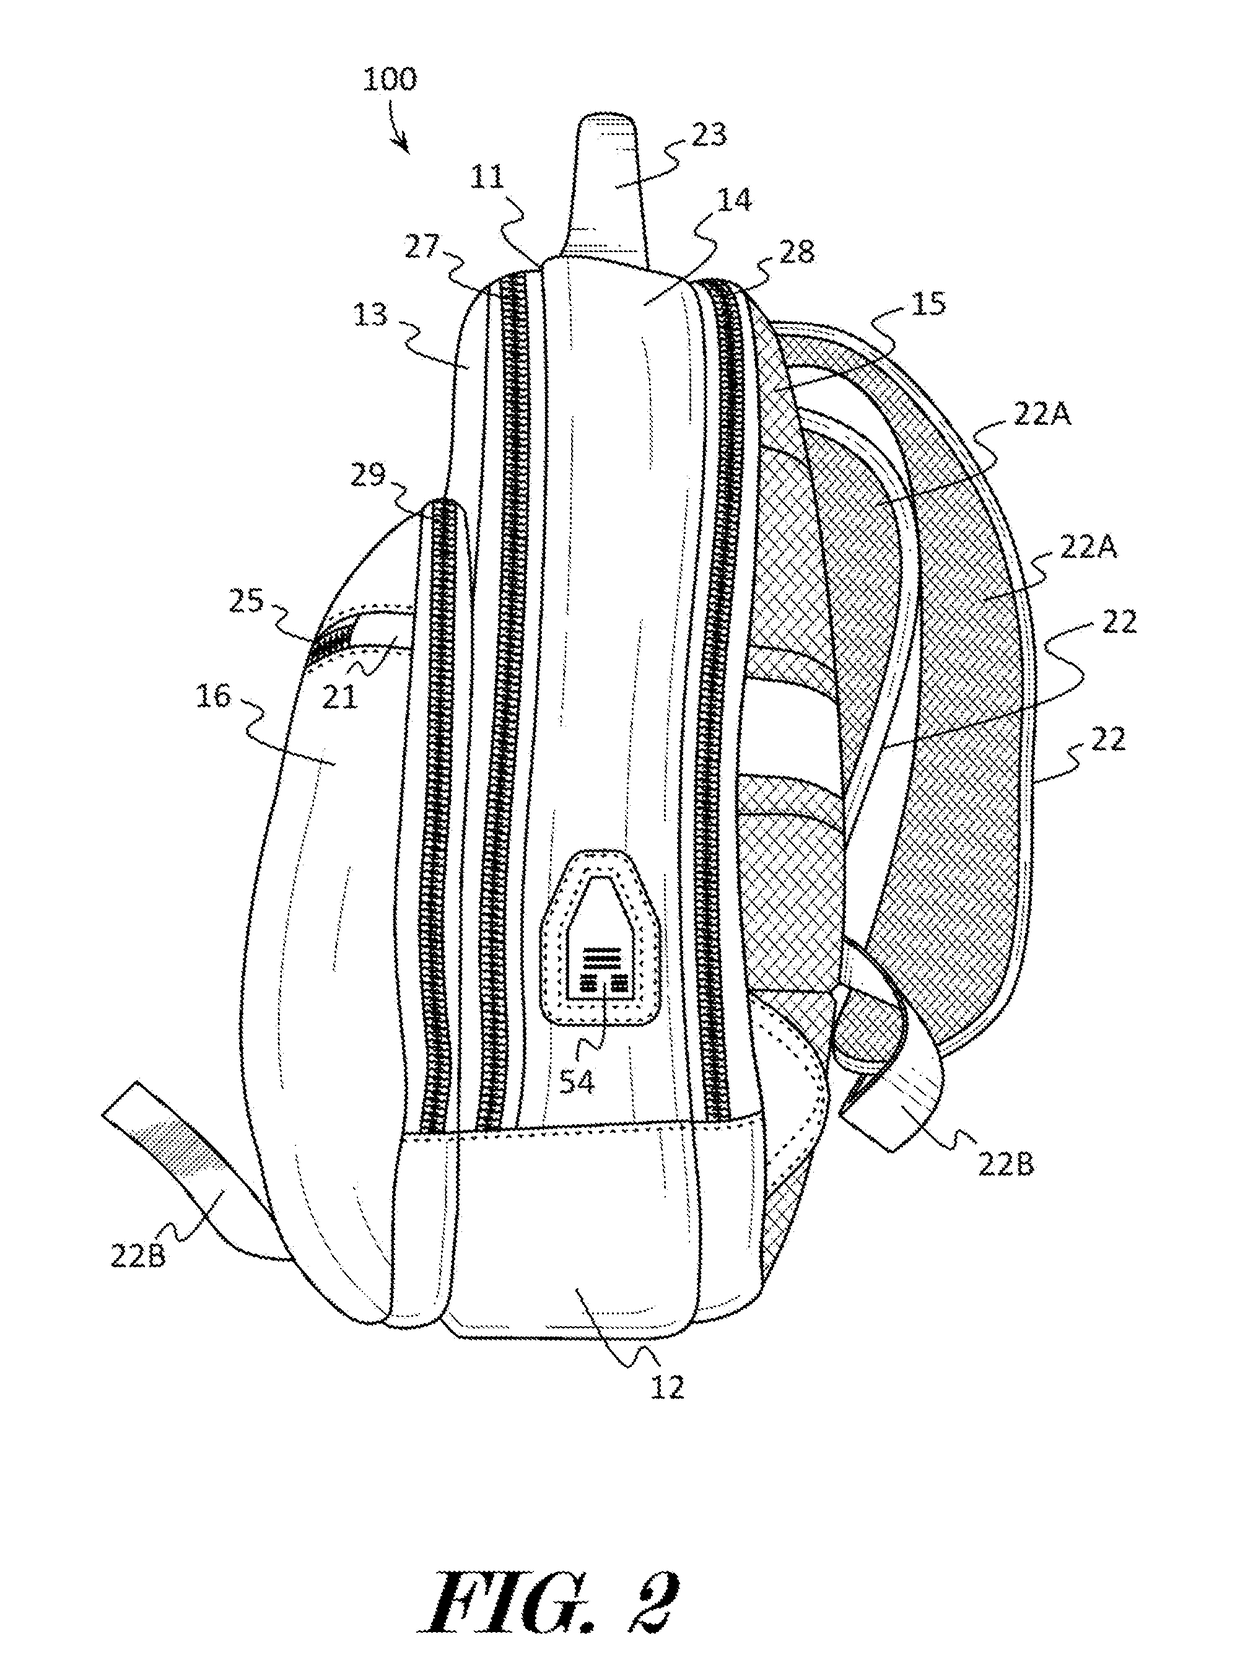 Vacuum assisted storage device